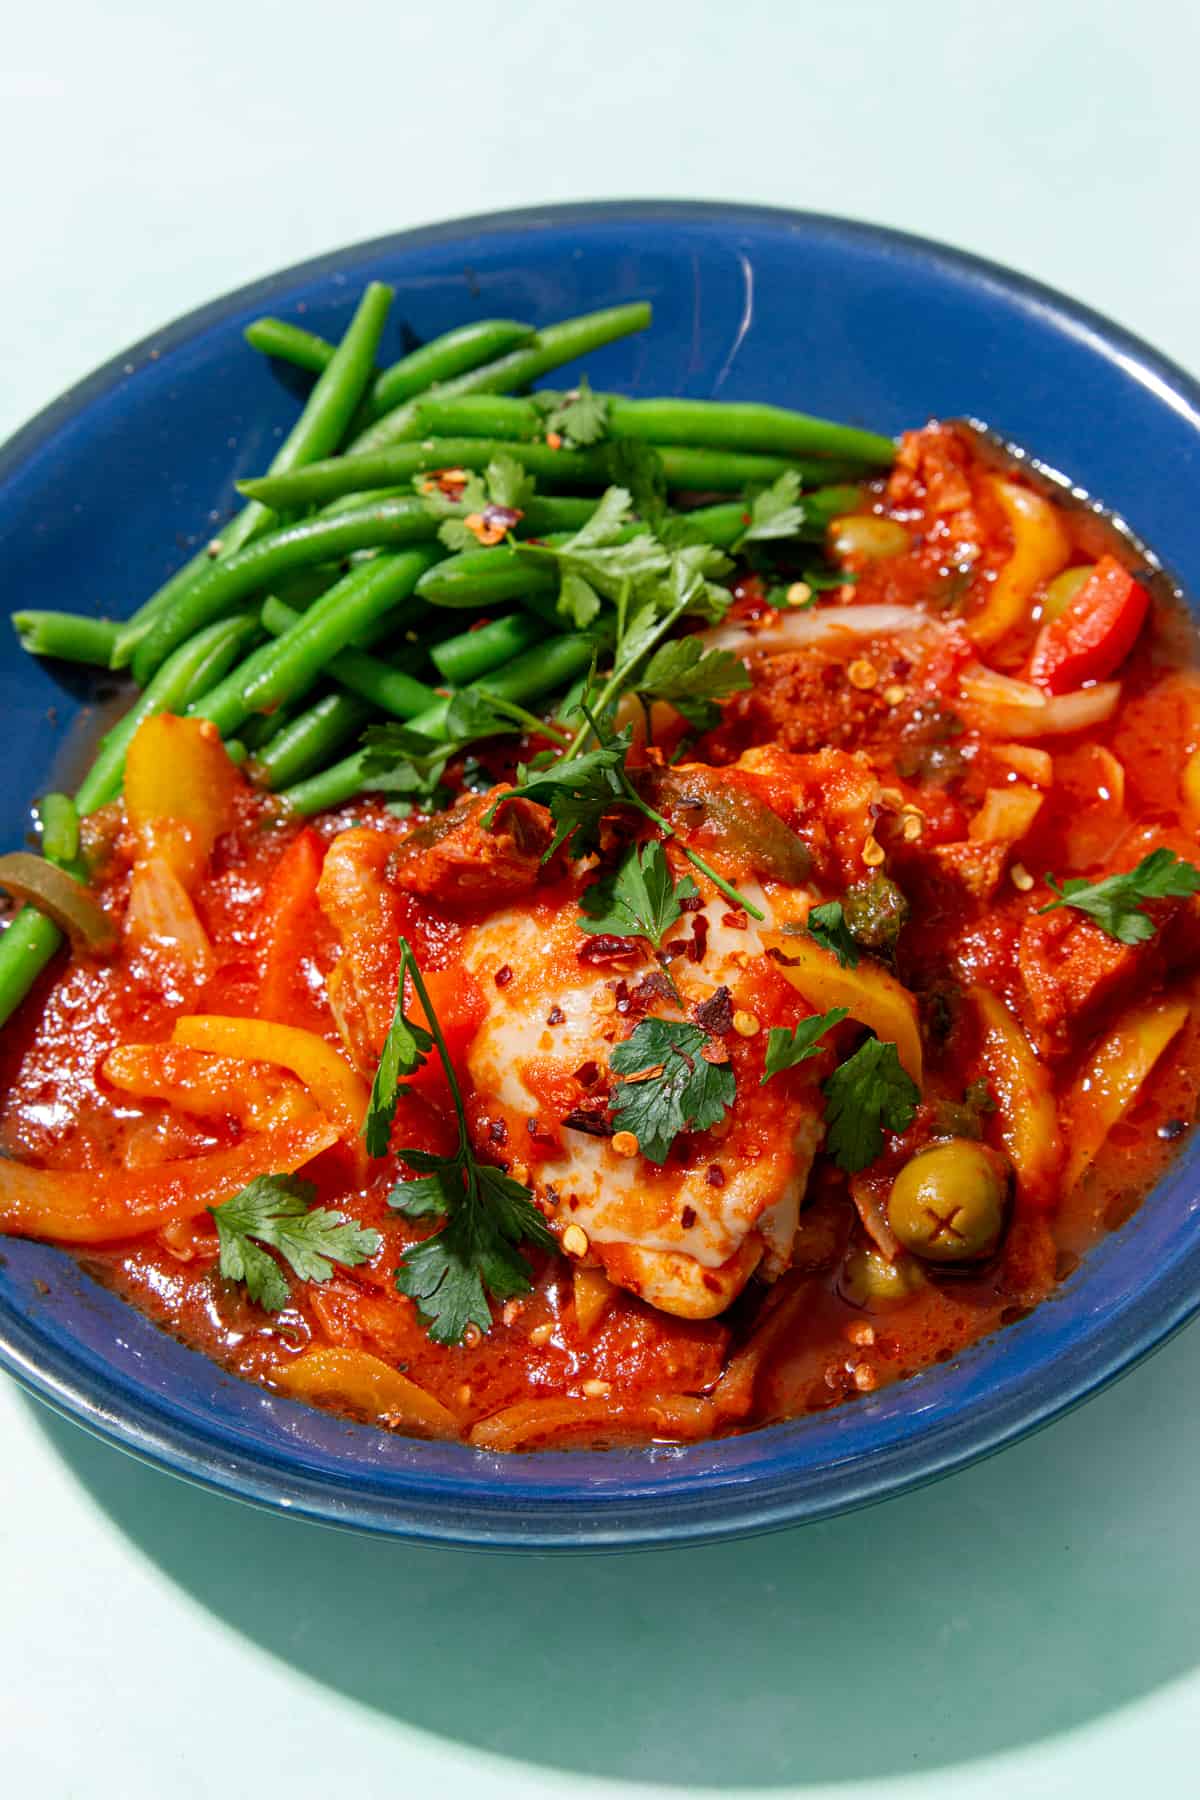 Chicken in a tomato sauce with green olives and green beans on a blue plate.